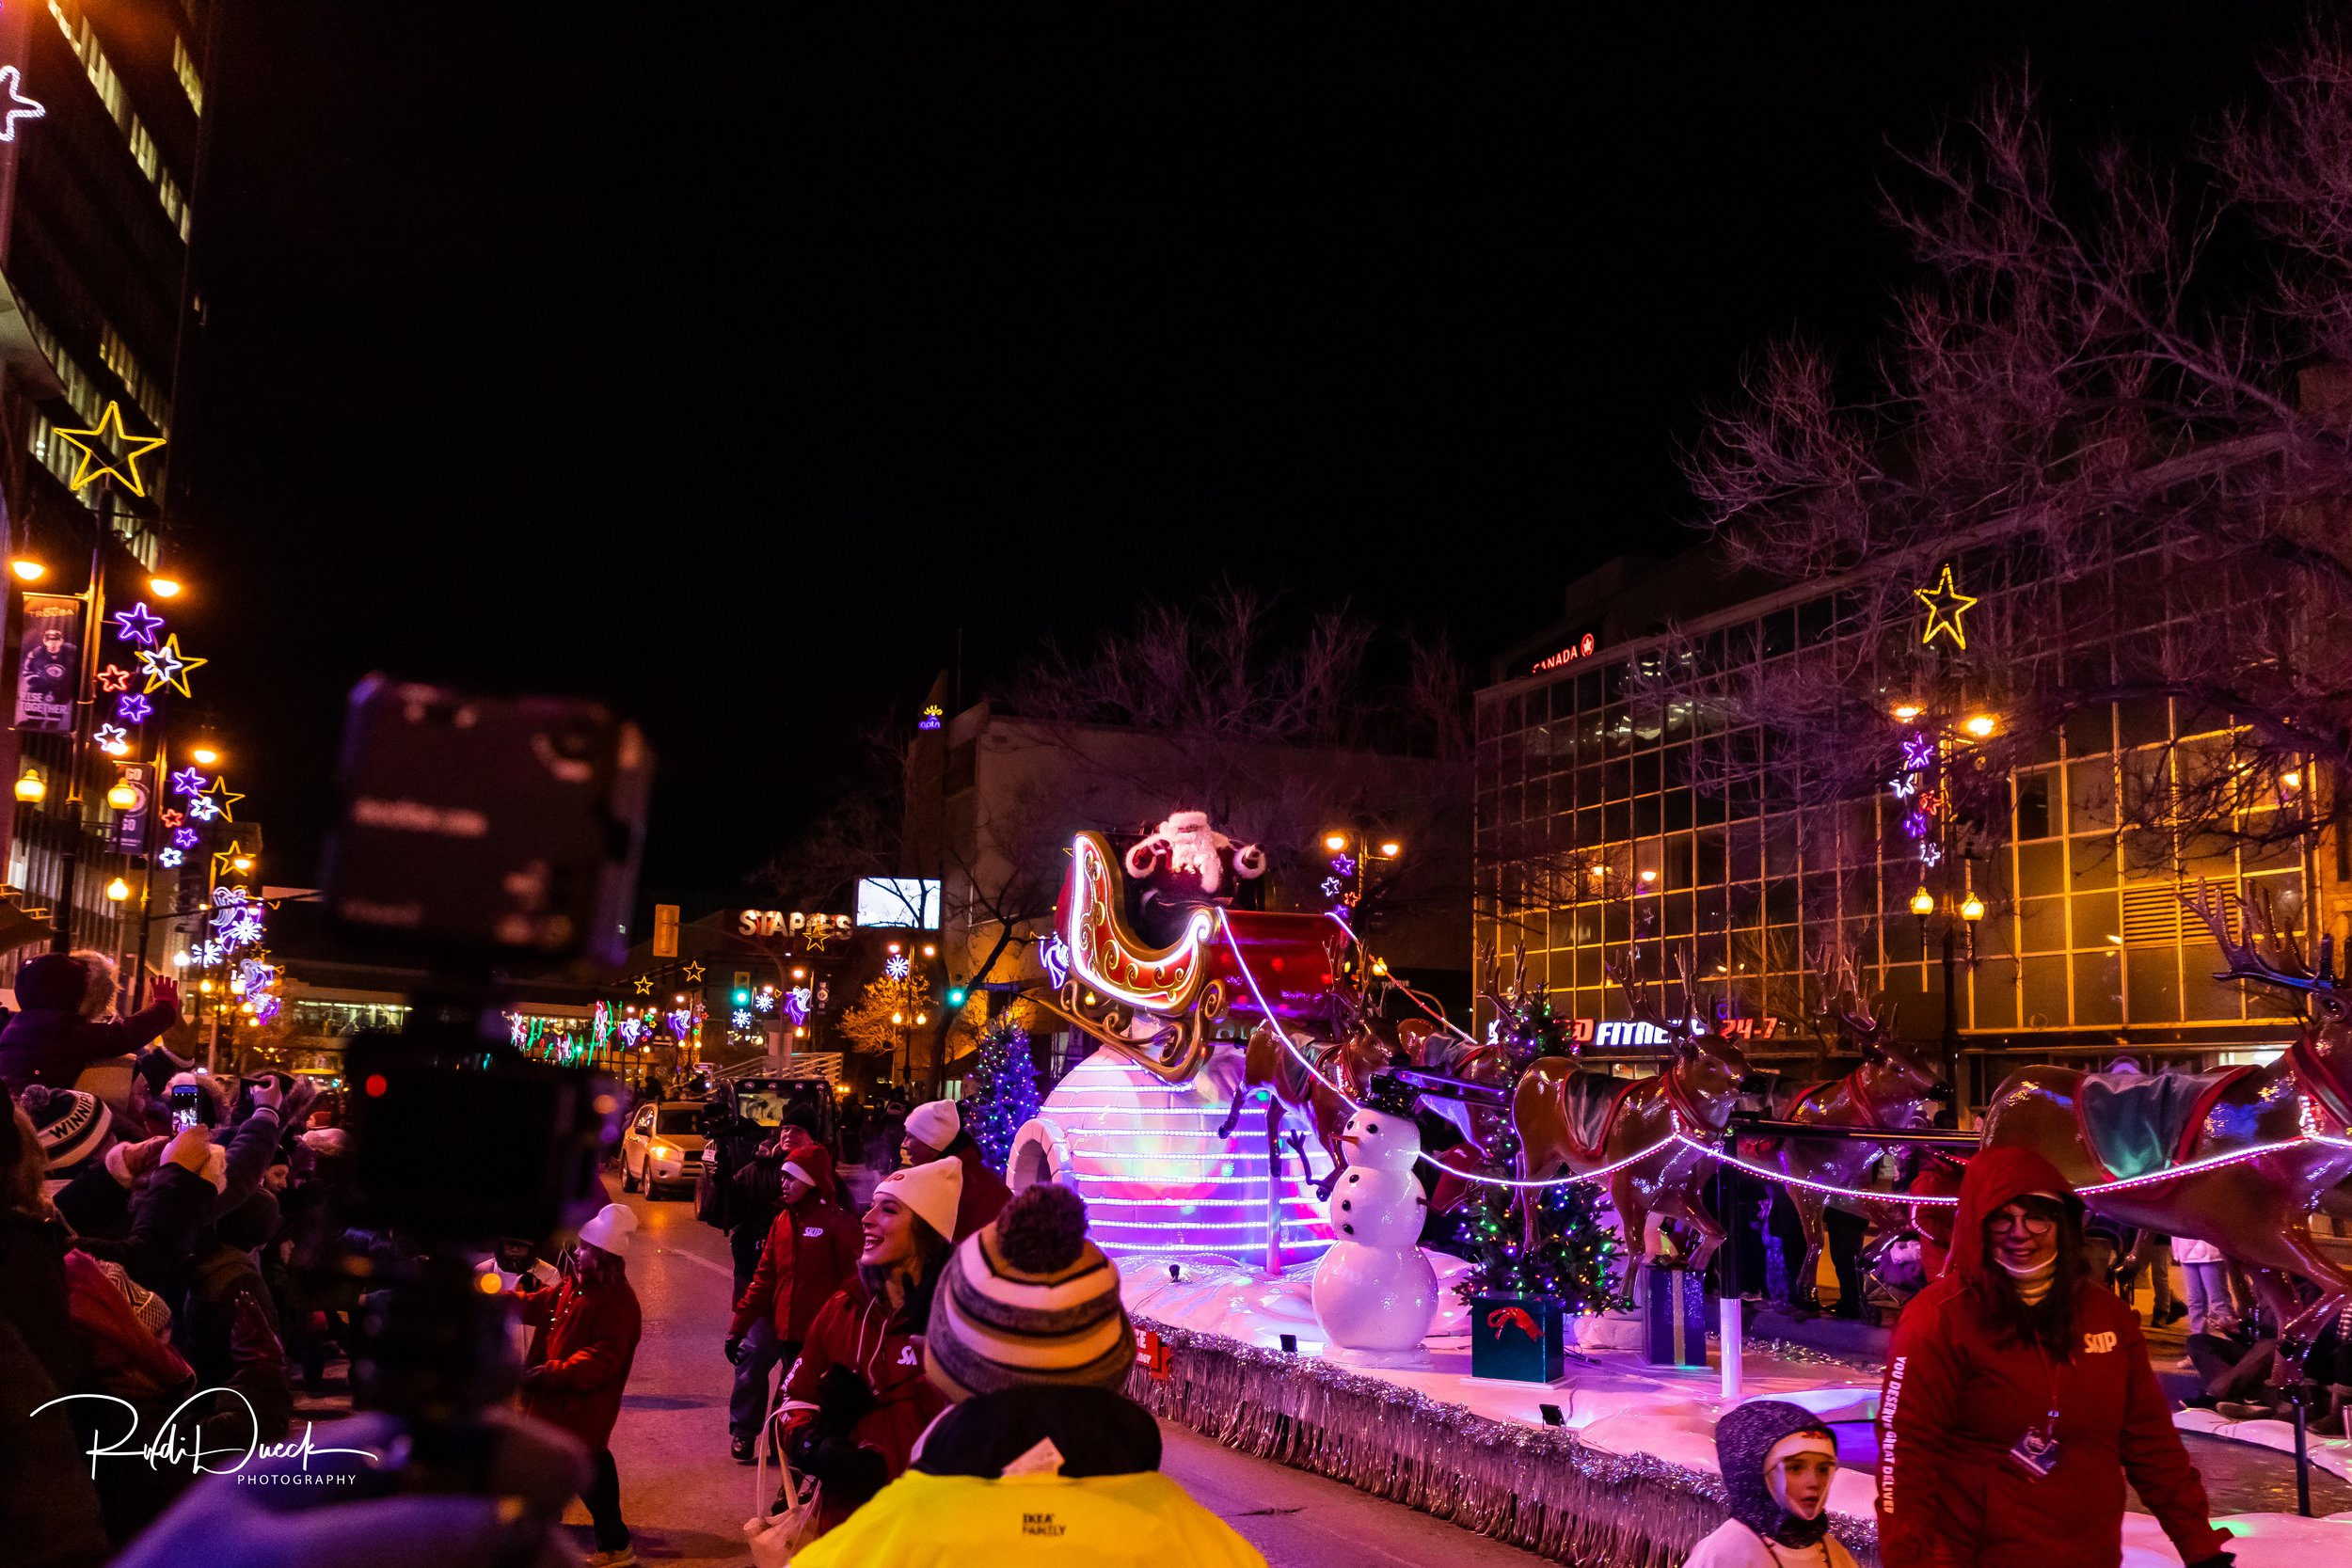 Welcome to the Enchanting Winnipeg Santa Claus Parade Picture Gallery!